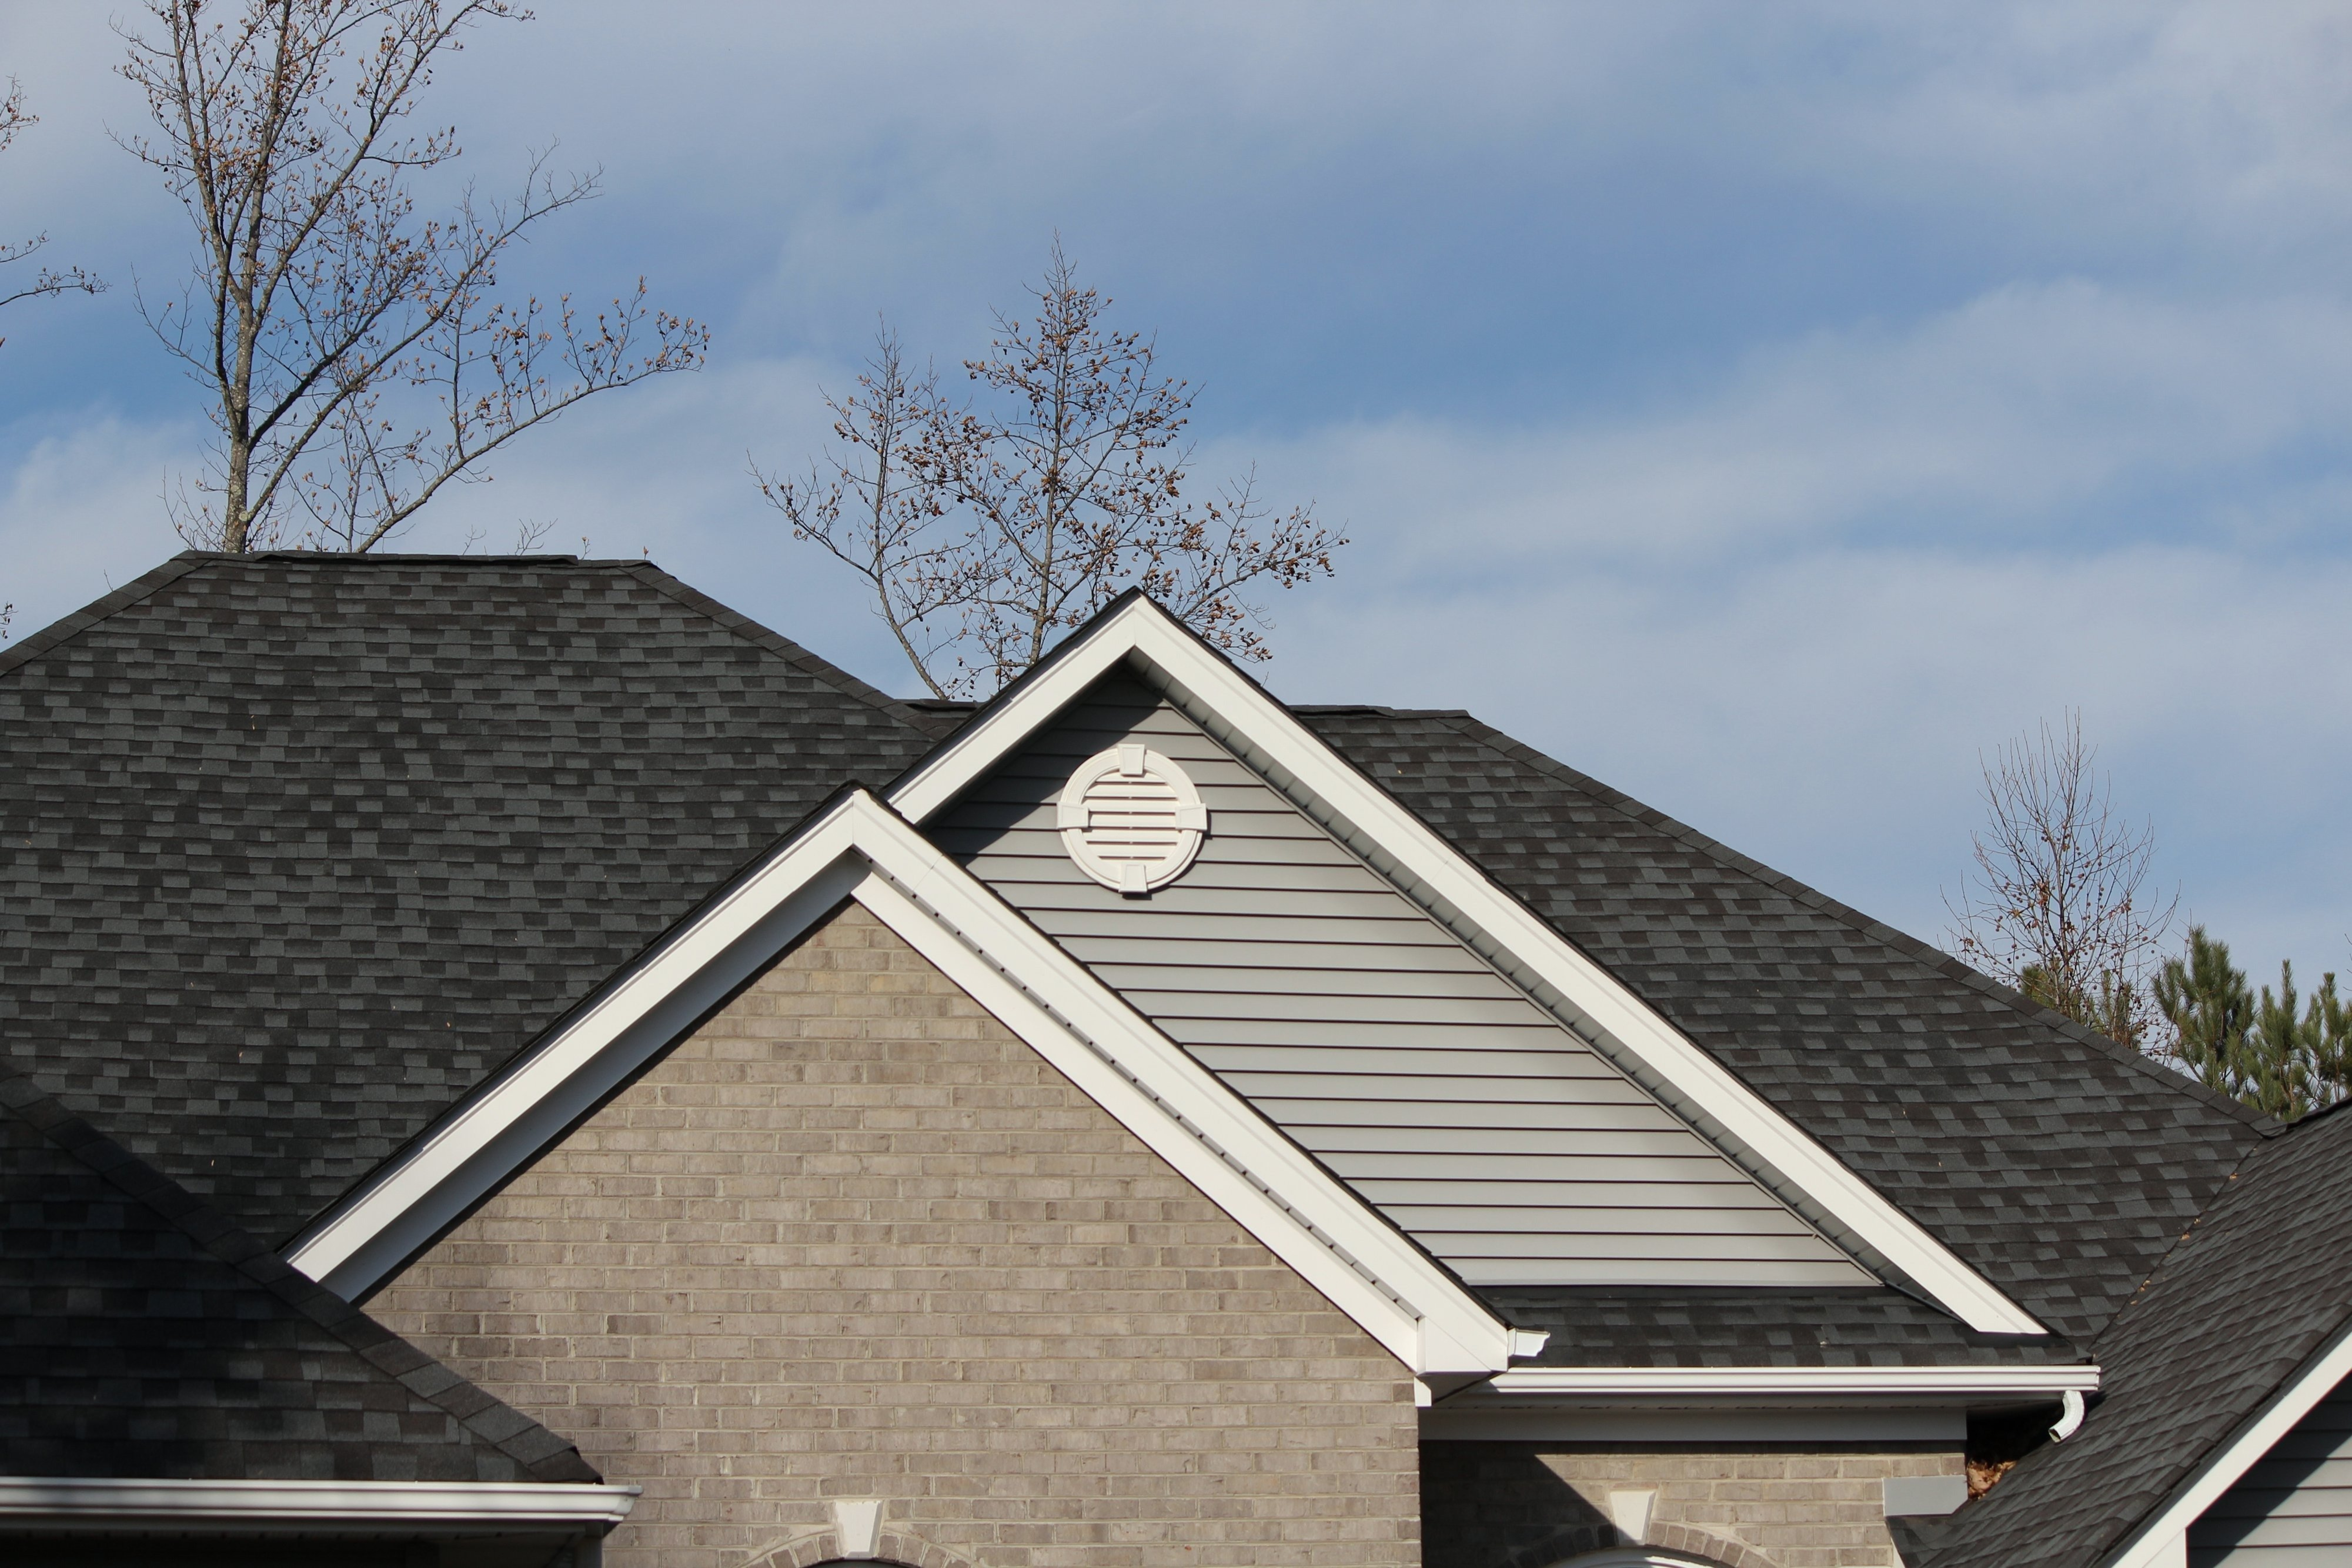 A residential shingle roof